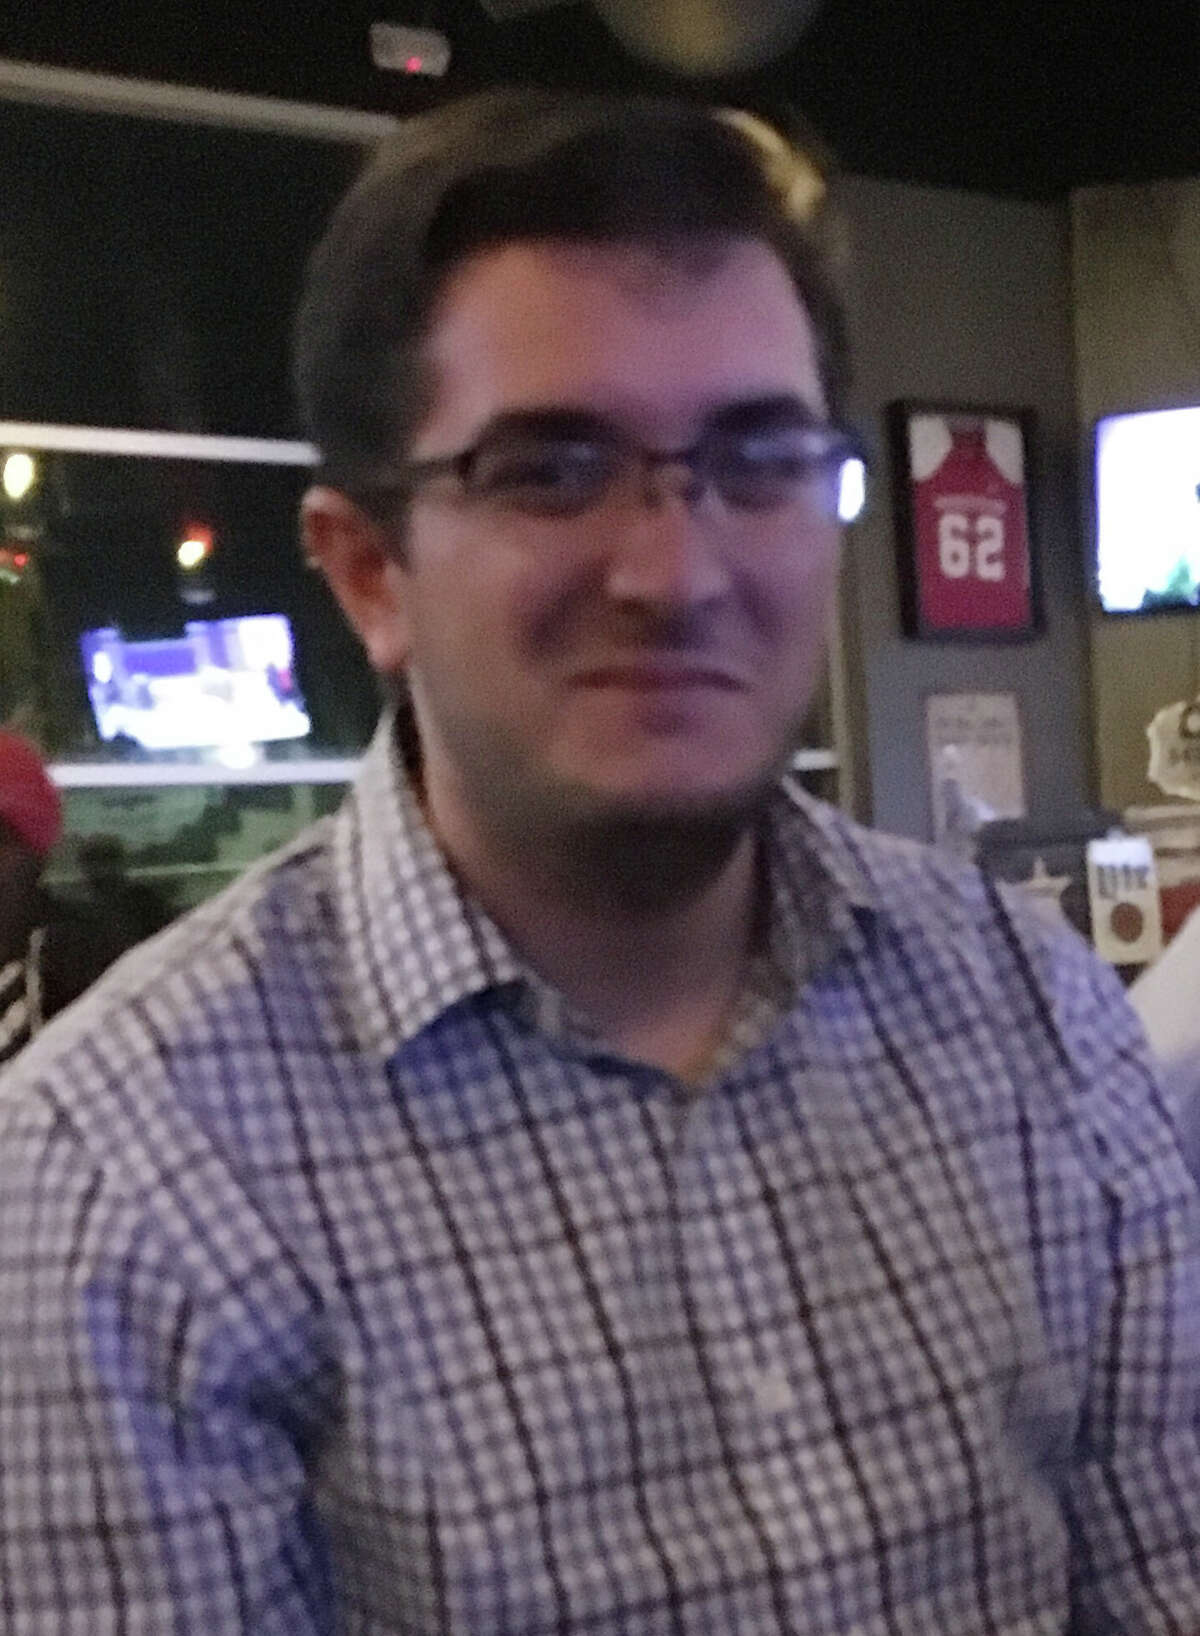 Matthew Wiltshire, a member of the University of Houston College Republicans: "We wish this election we would talk about issues - capitalism vs. socialism, the ethics of abortion. Instead we wind up talking about whether Donald Trump is an ass****. That's not why I got involved in politics."